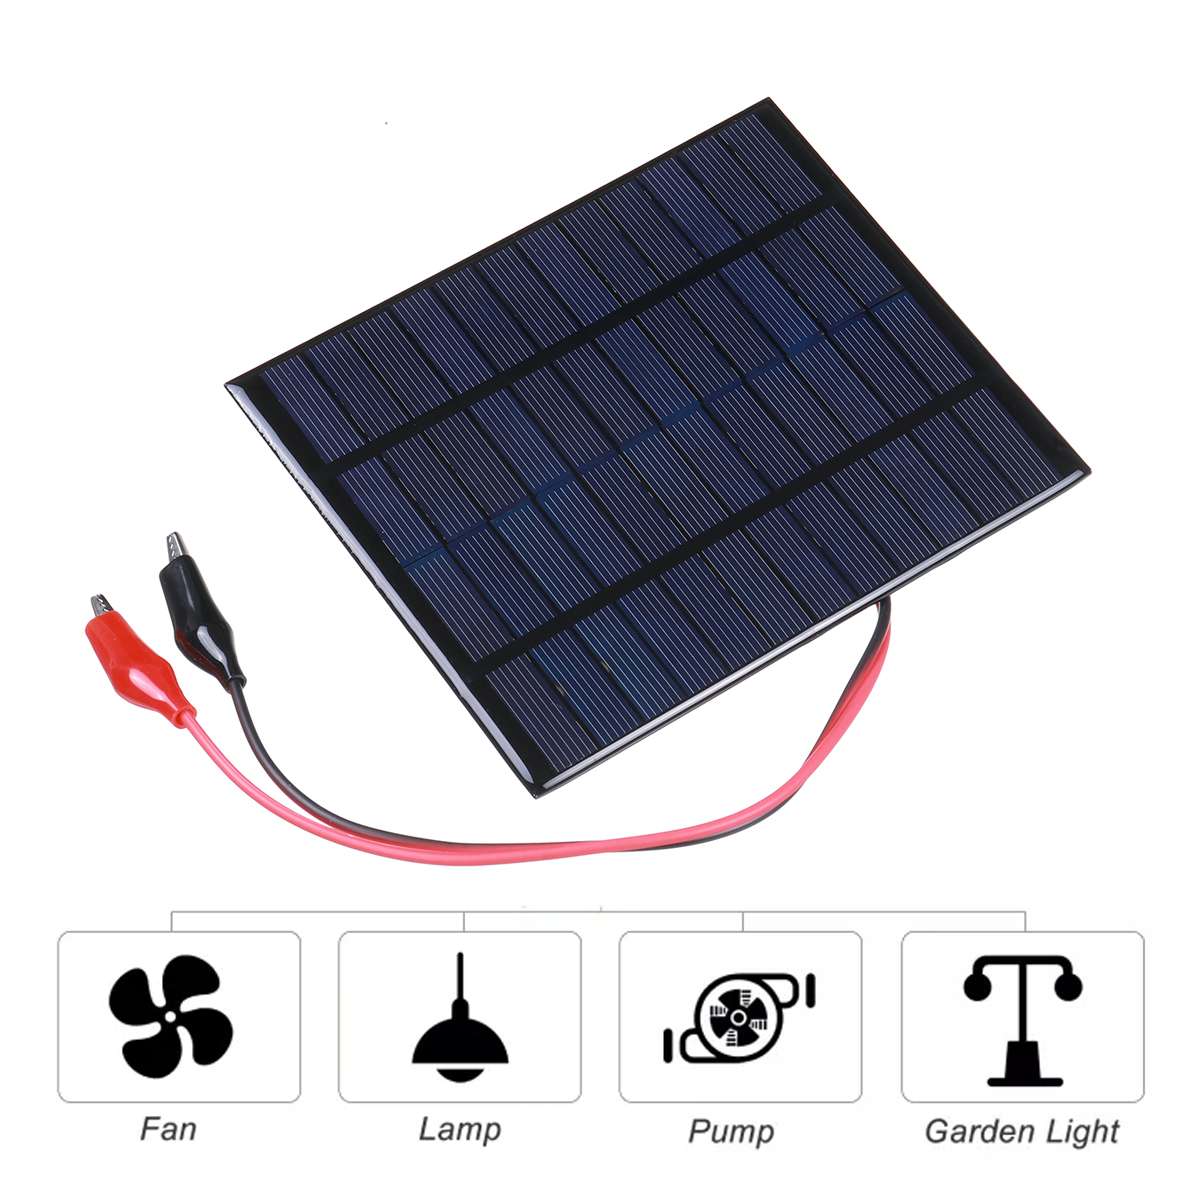 20W Solar Panel 12V Polycrystalline Silicon Solar Cell DIY Cable Waterproof Outdoor Rechargeable Power System For Outdoor Campin